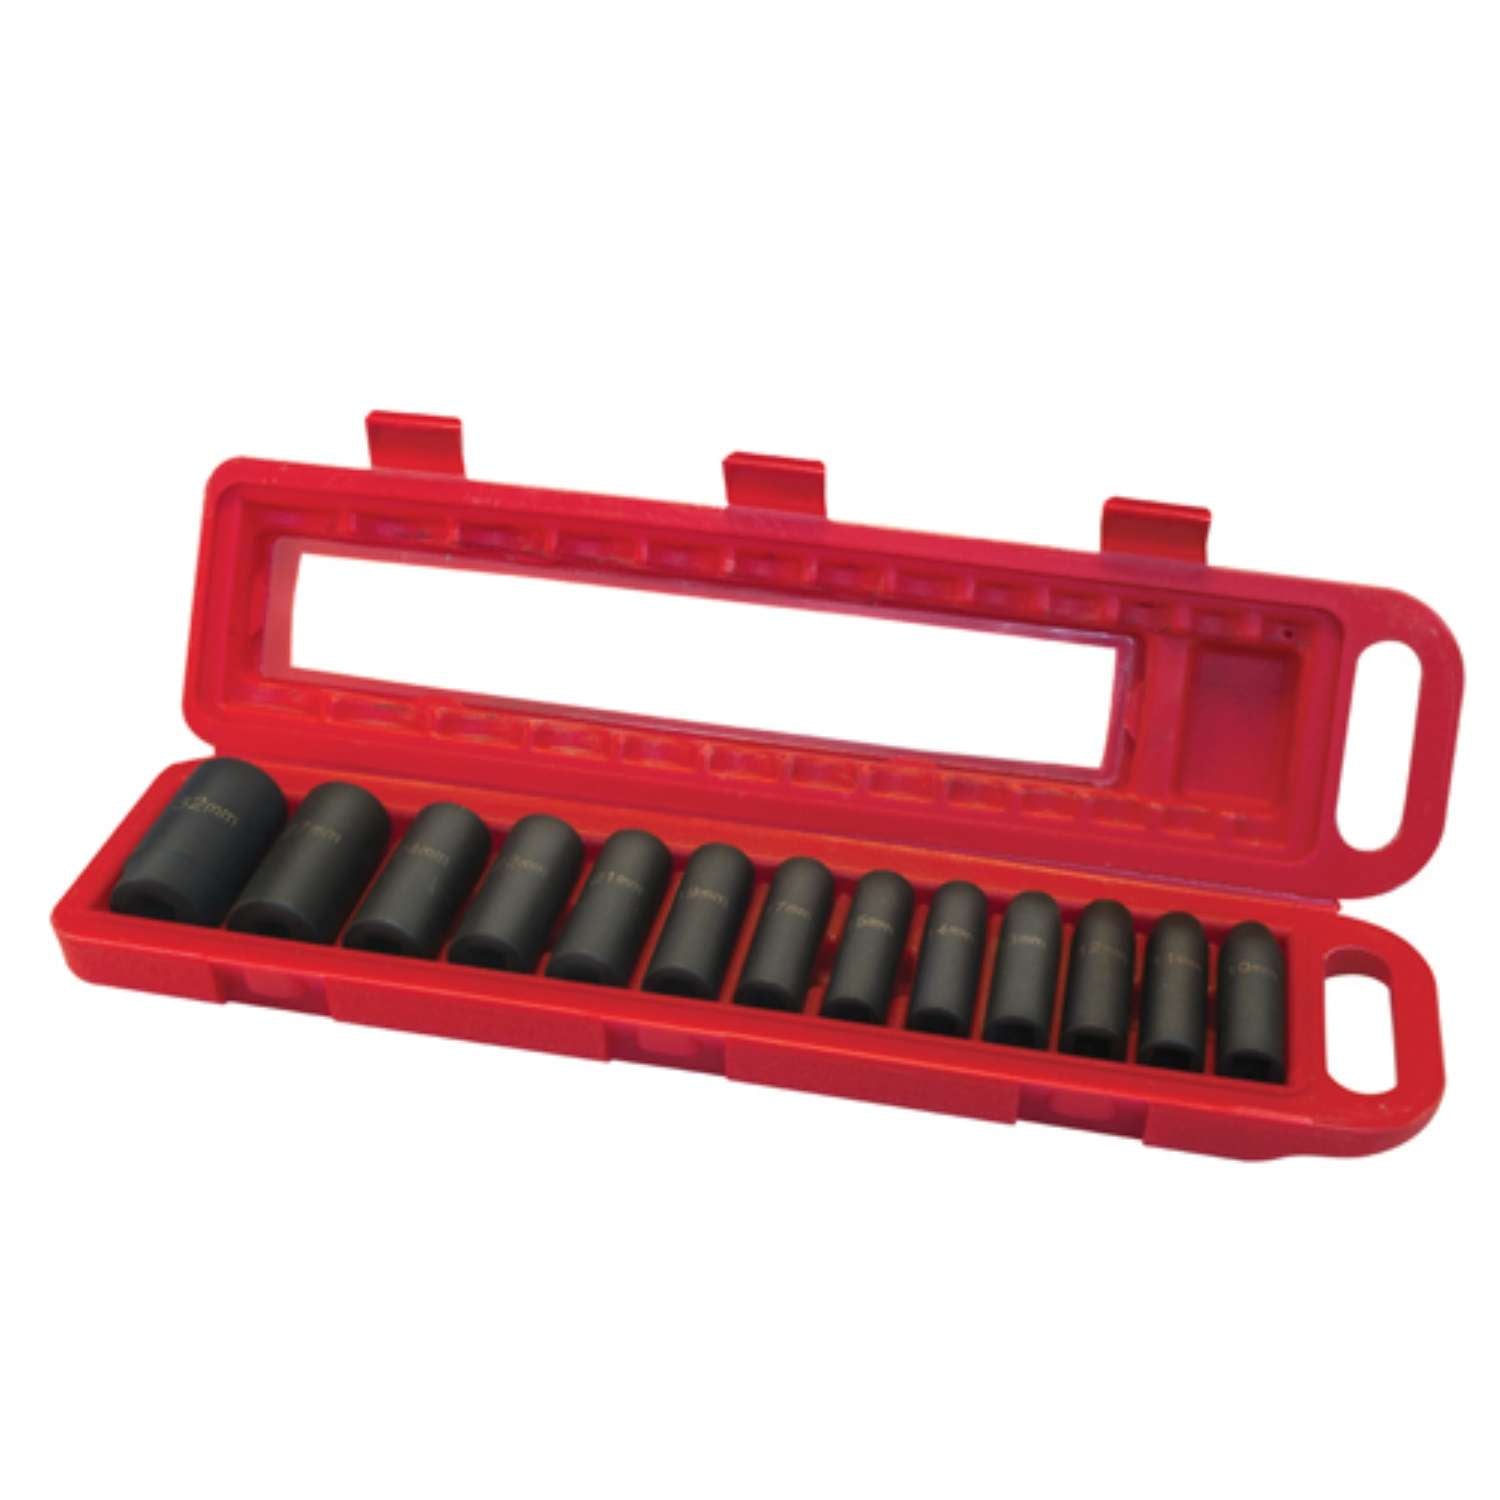 Set of 1/2" impact socket wrenches square head 13pcs tool case 10-32mm